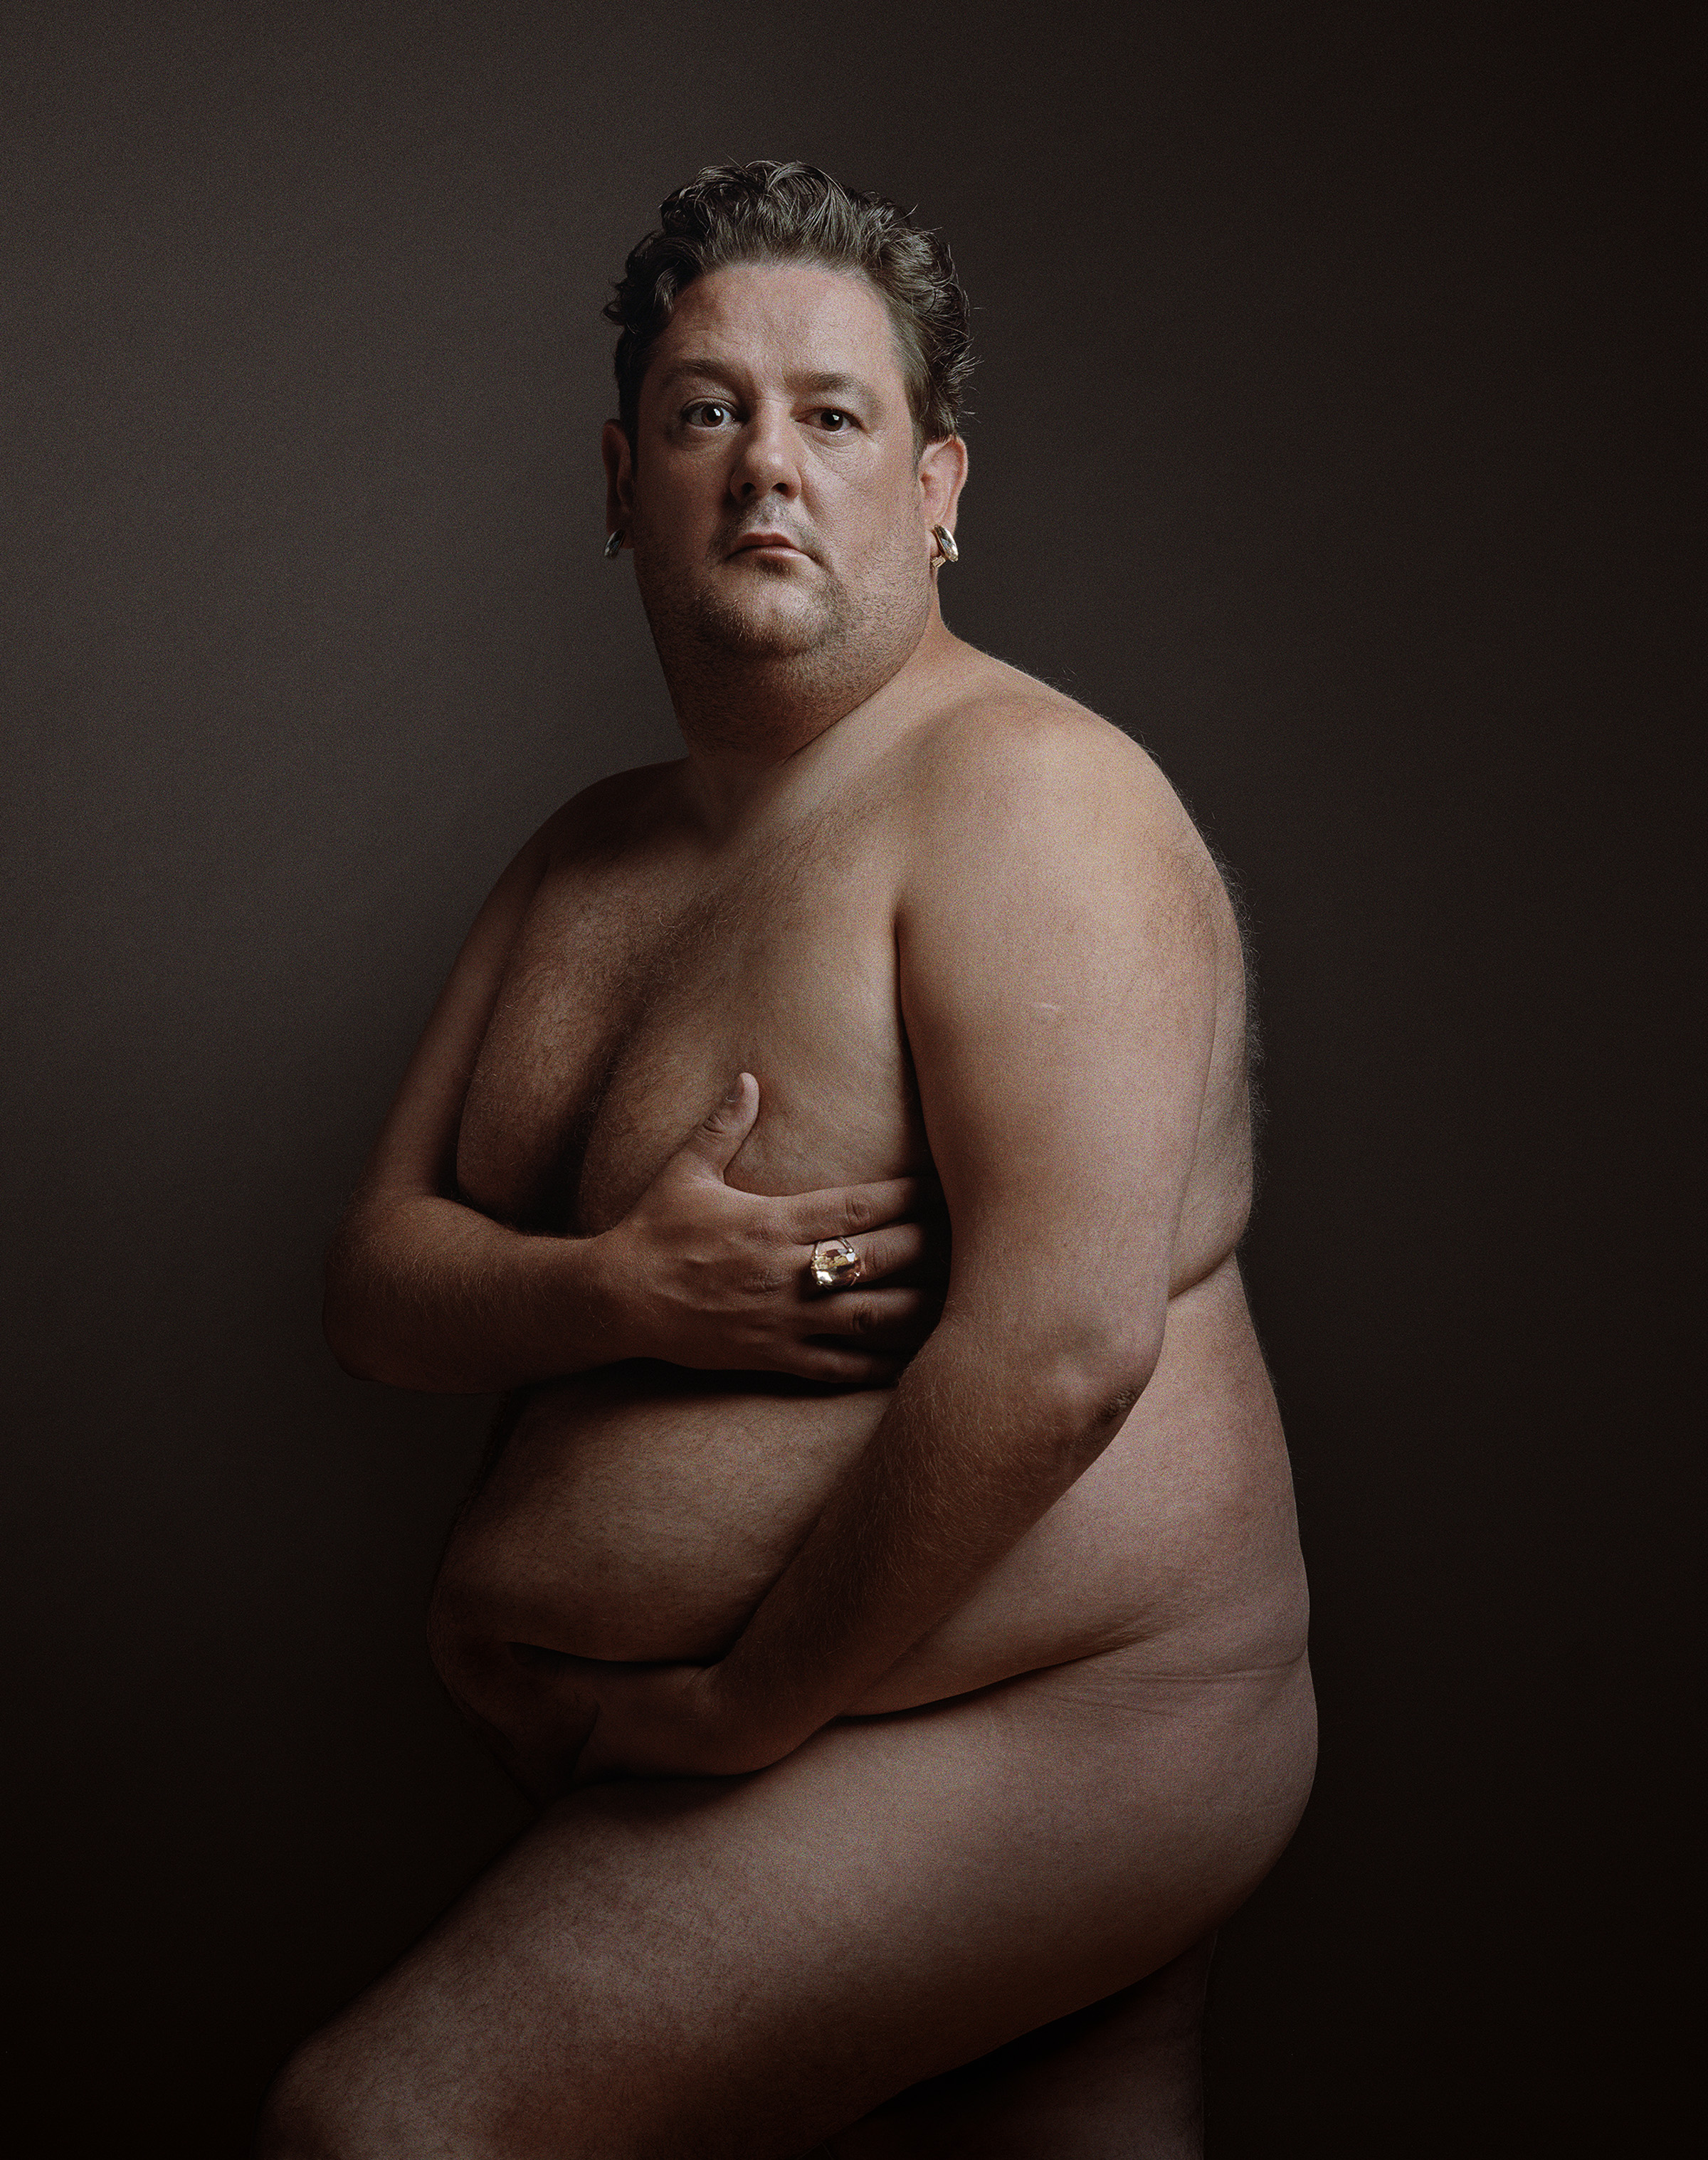 Gallery announces exhibition of naked portraits.